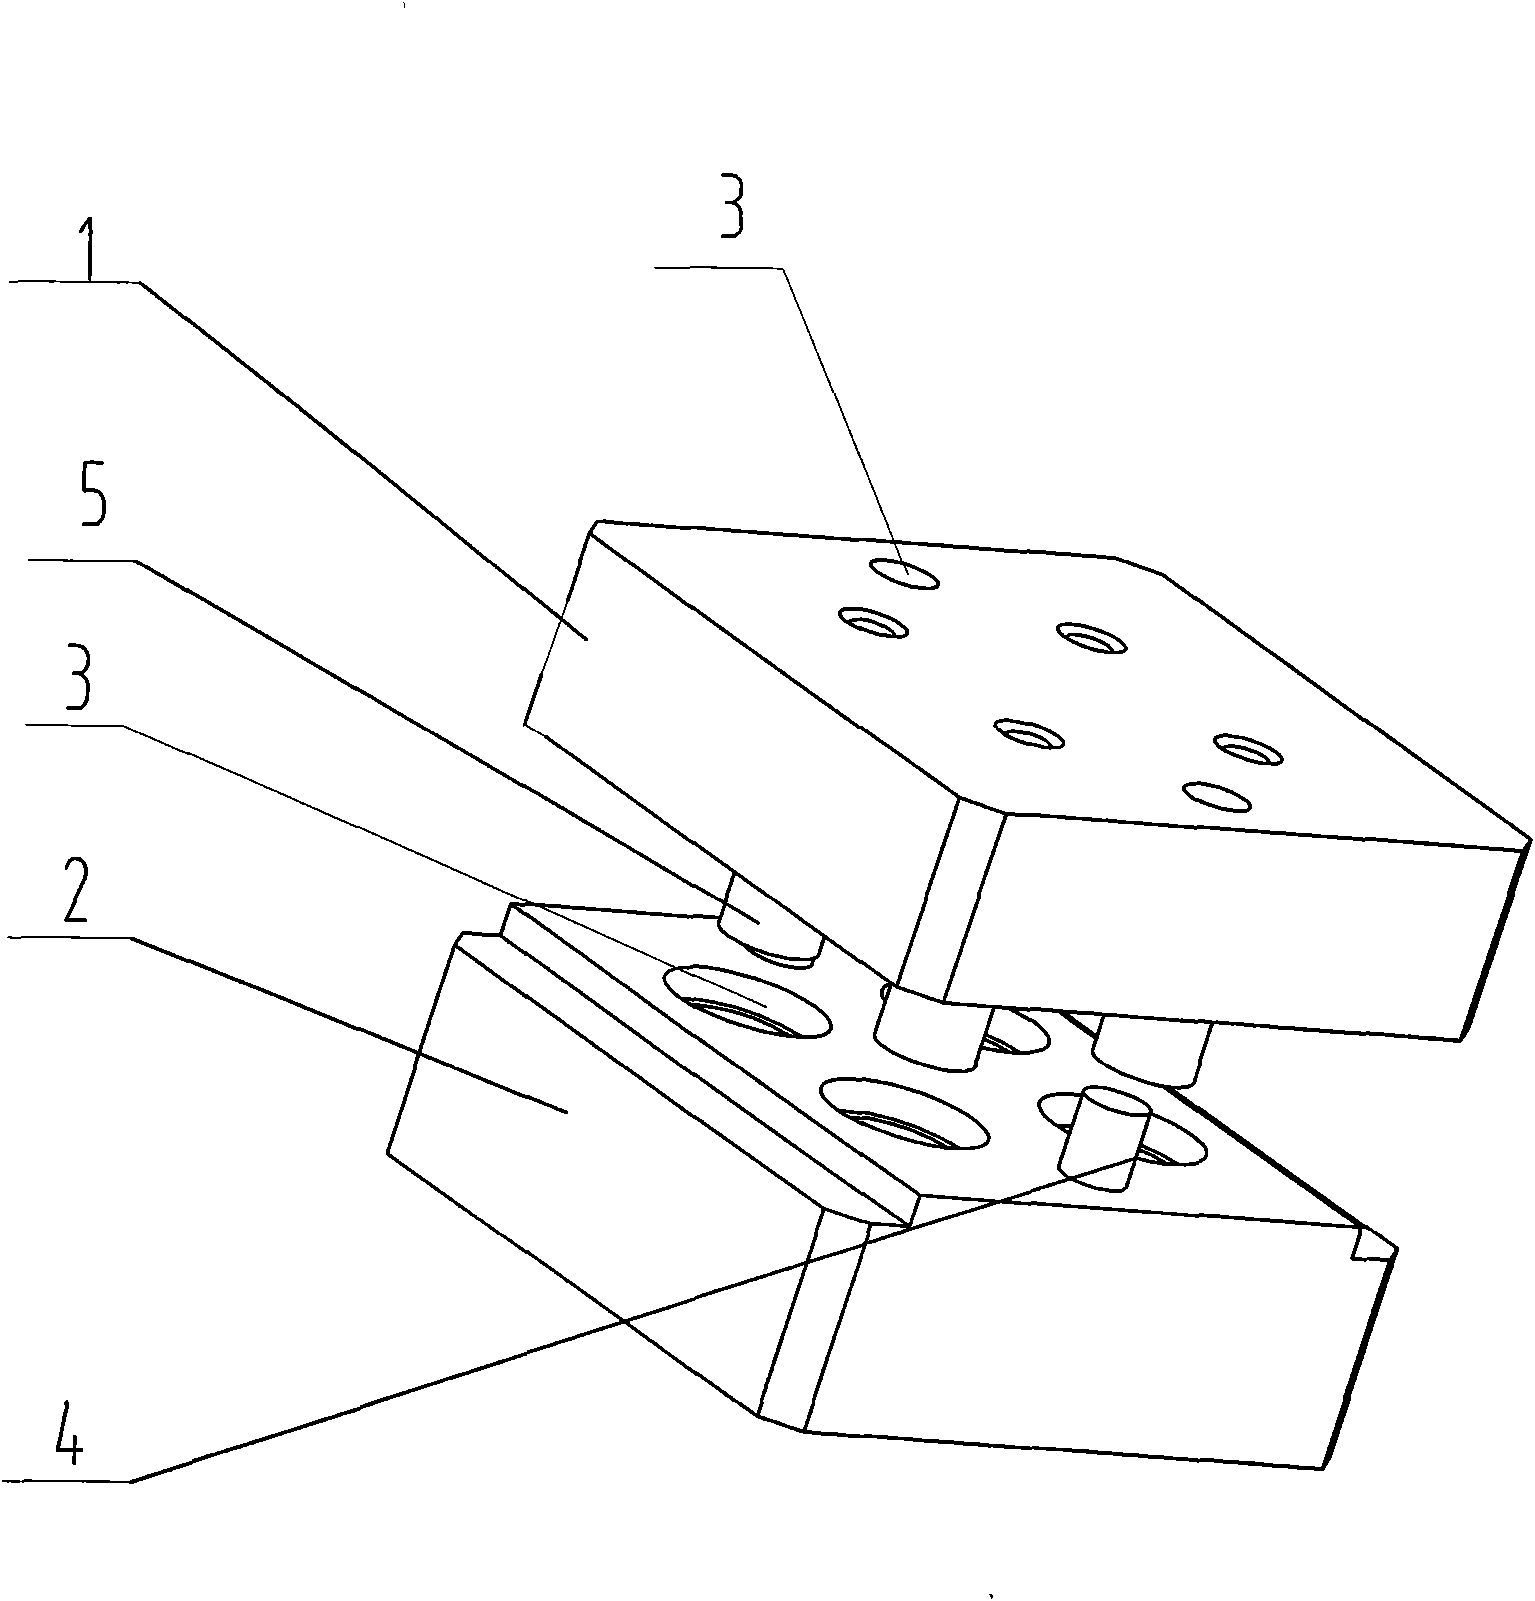 Process for manufacturing press-forming mould for simultaneously manufacturing a plurality of parts